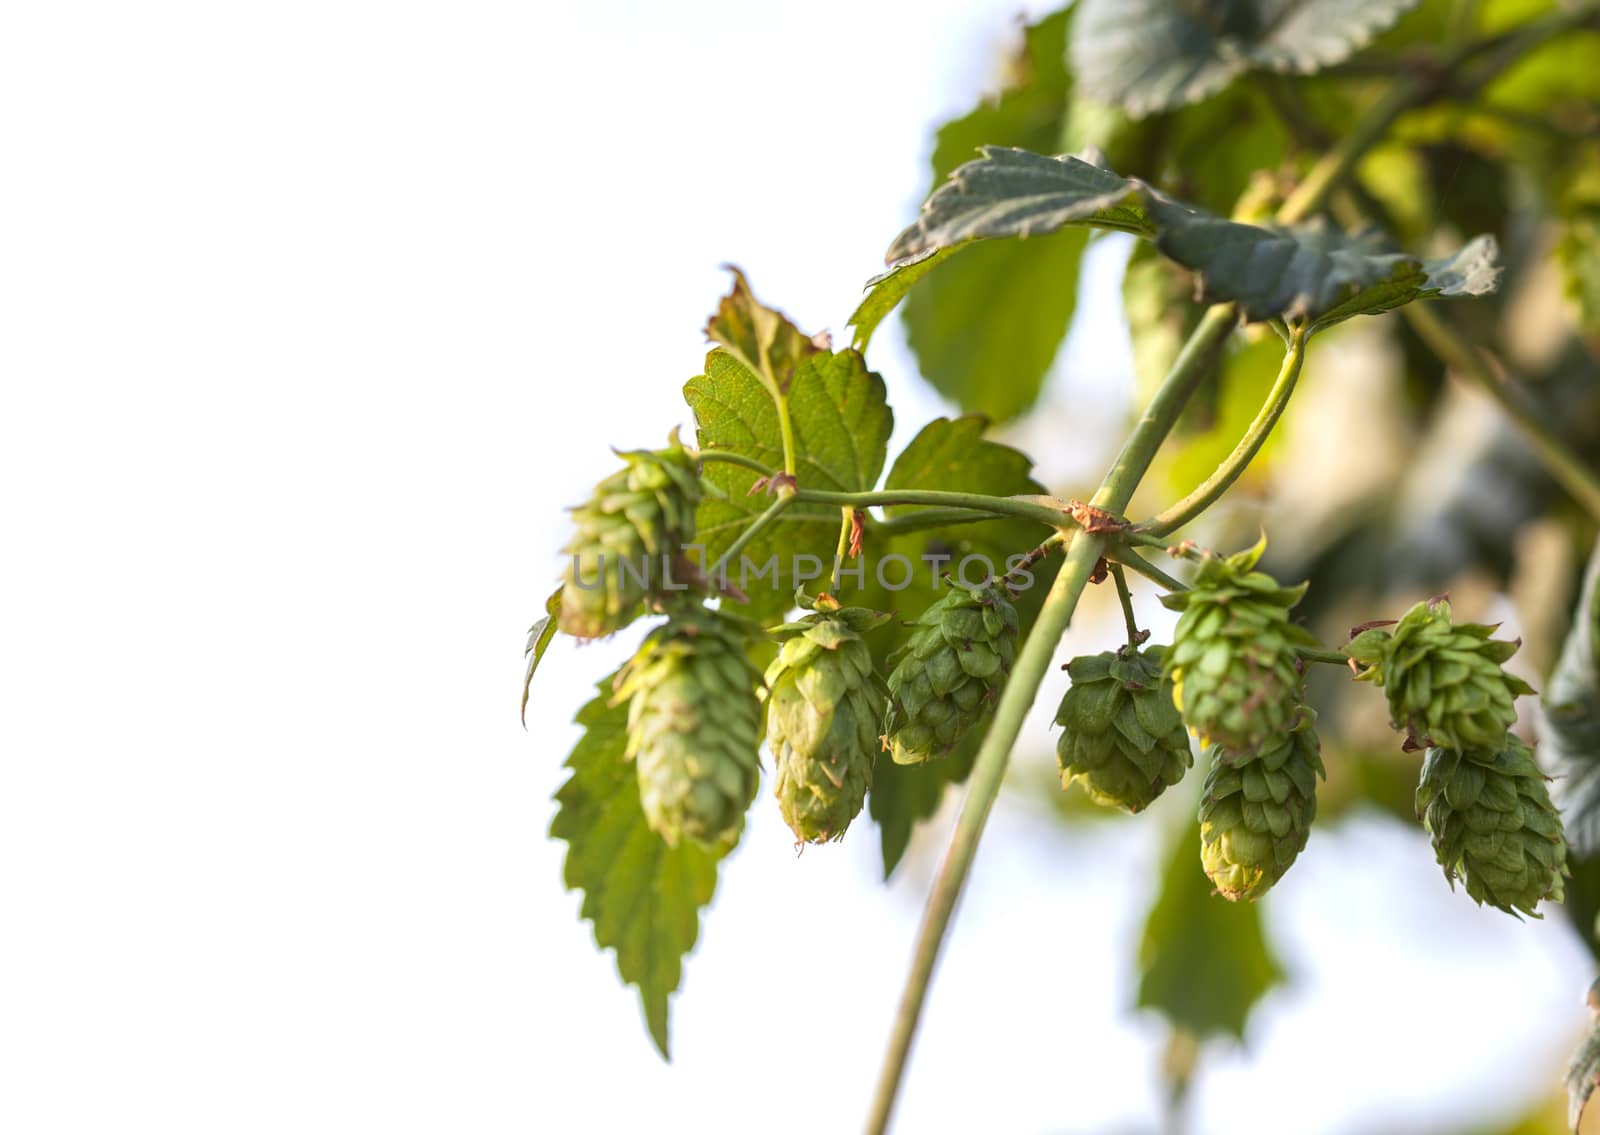 Hops on White by orcearo